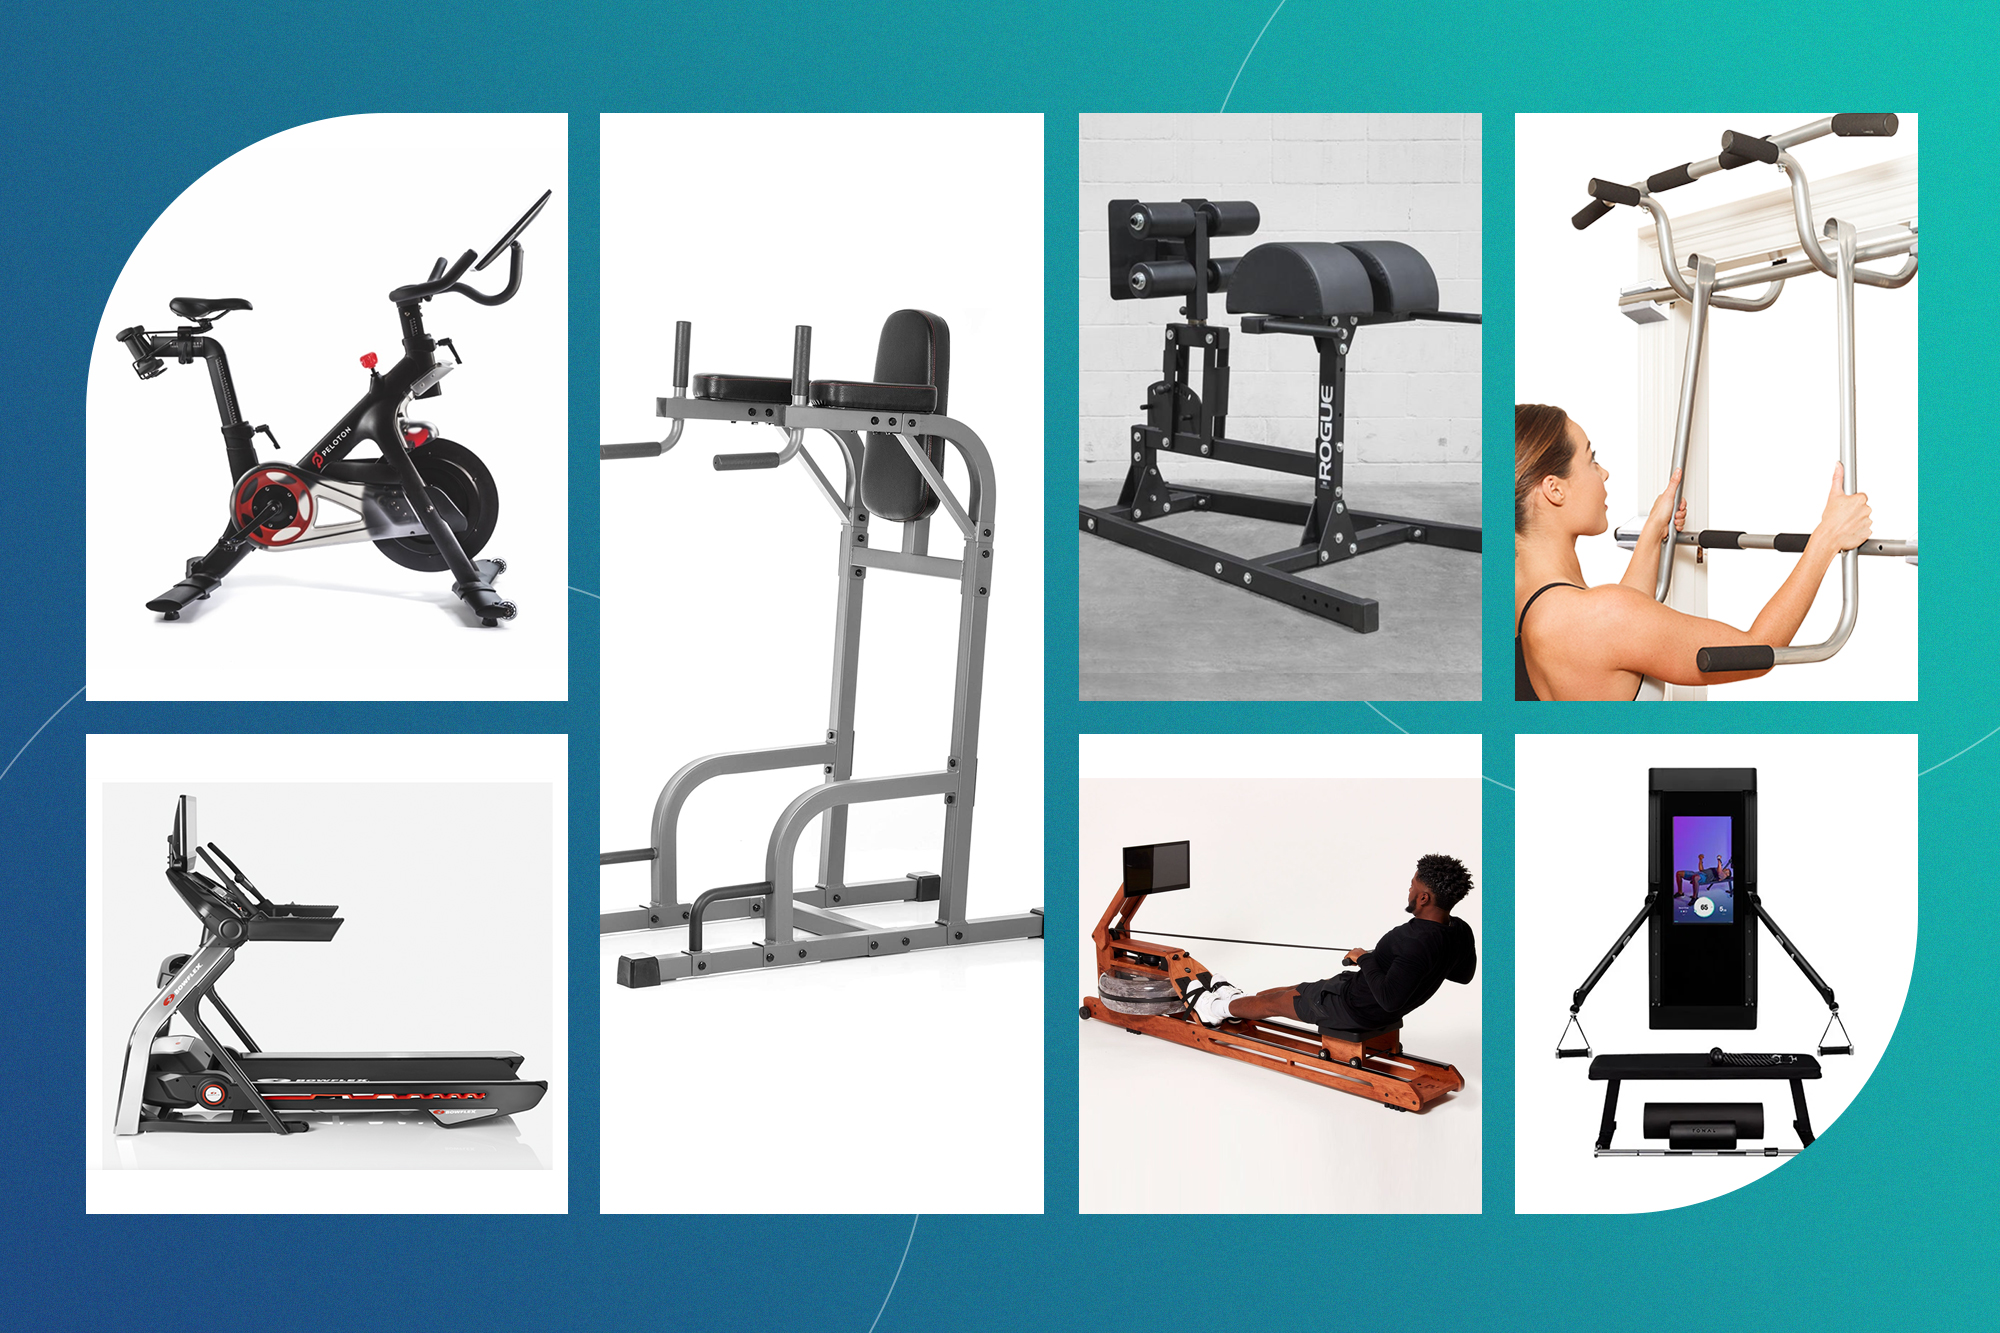 How To Choose The Best Exercise Equipment For You